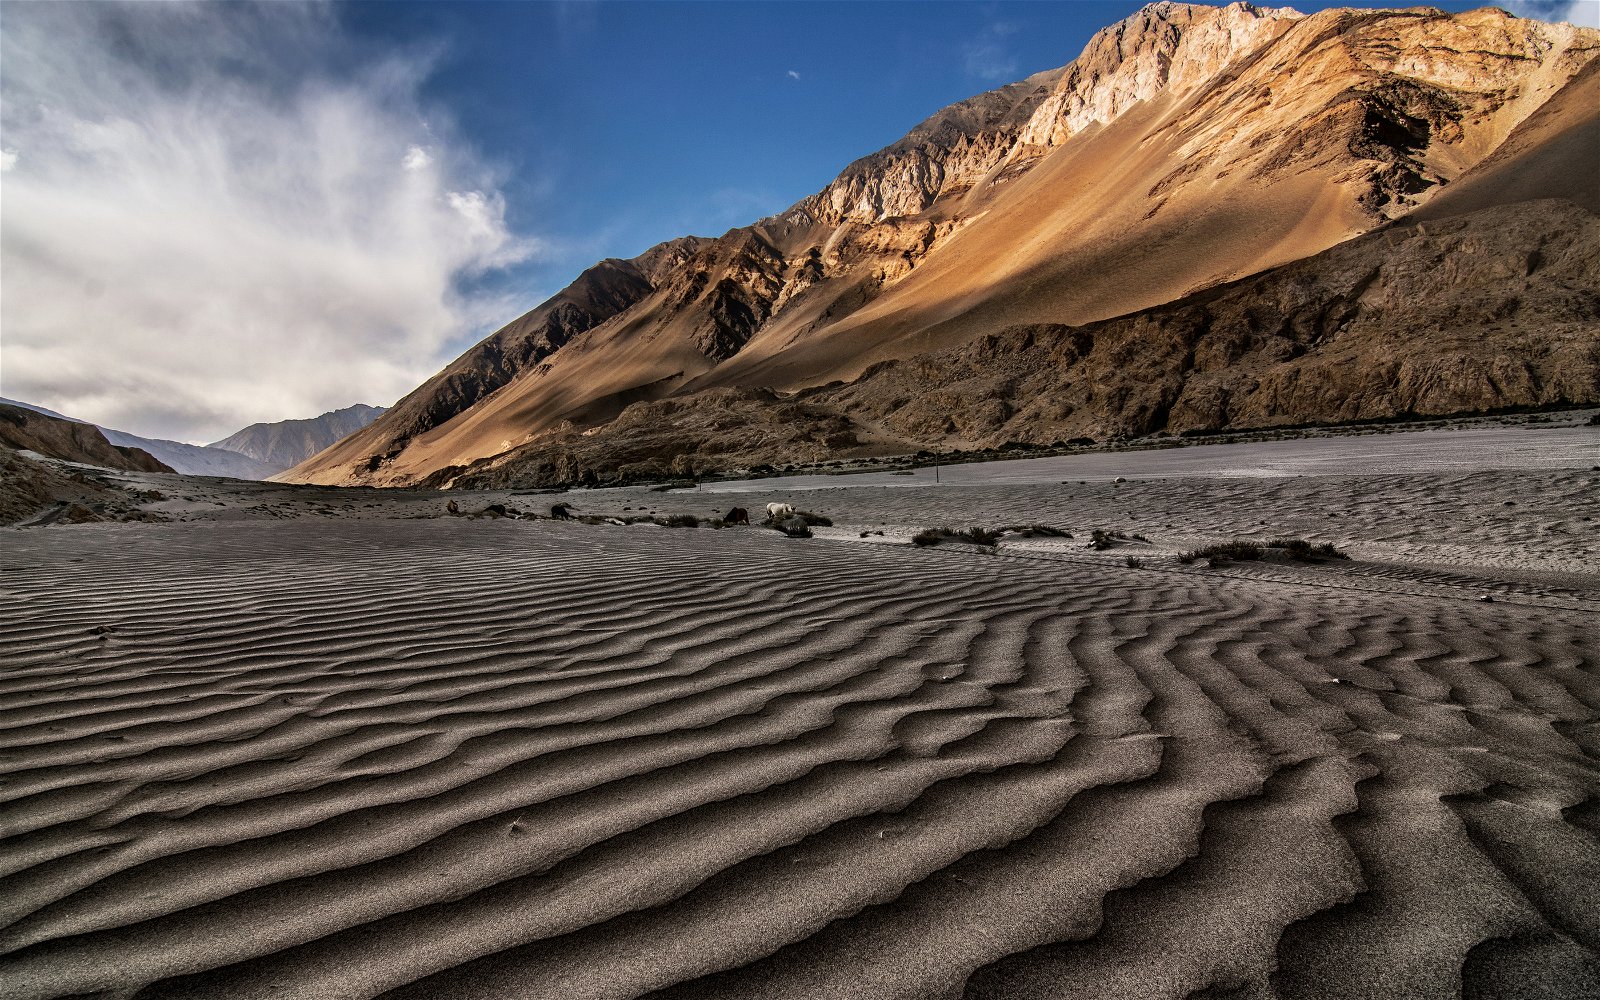 Ladakh's Nubra Valley: The Complete Guide